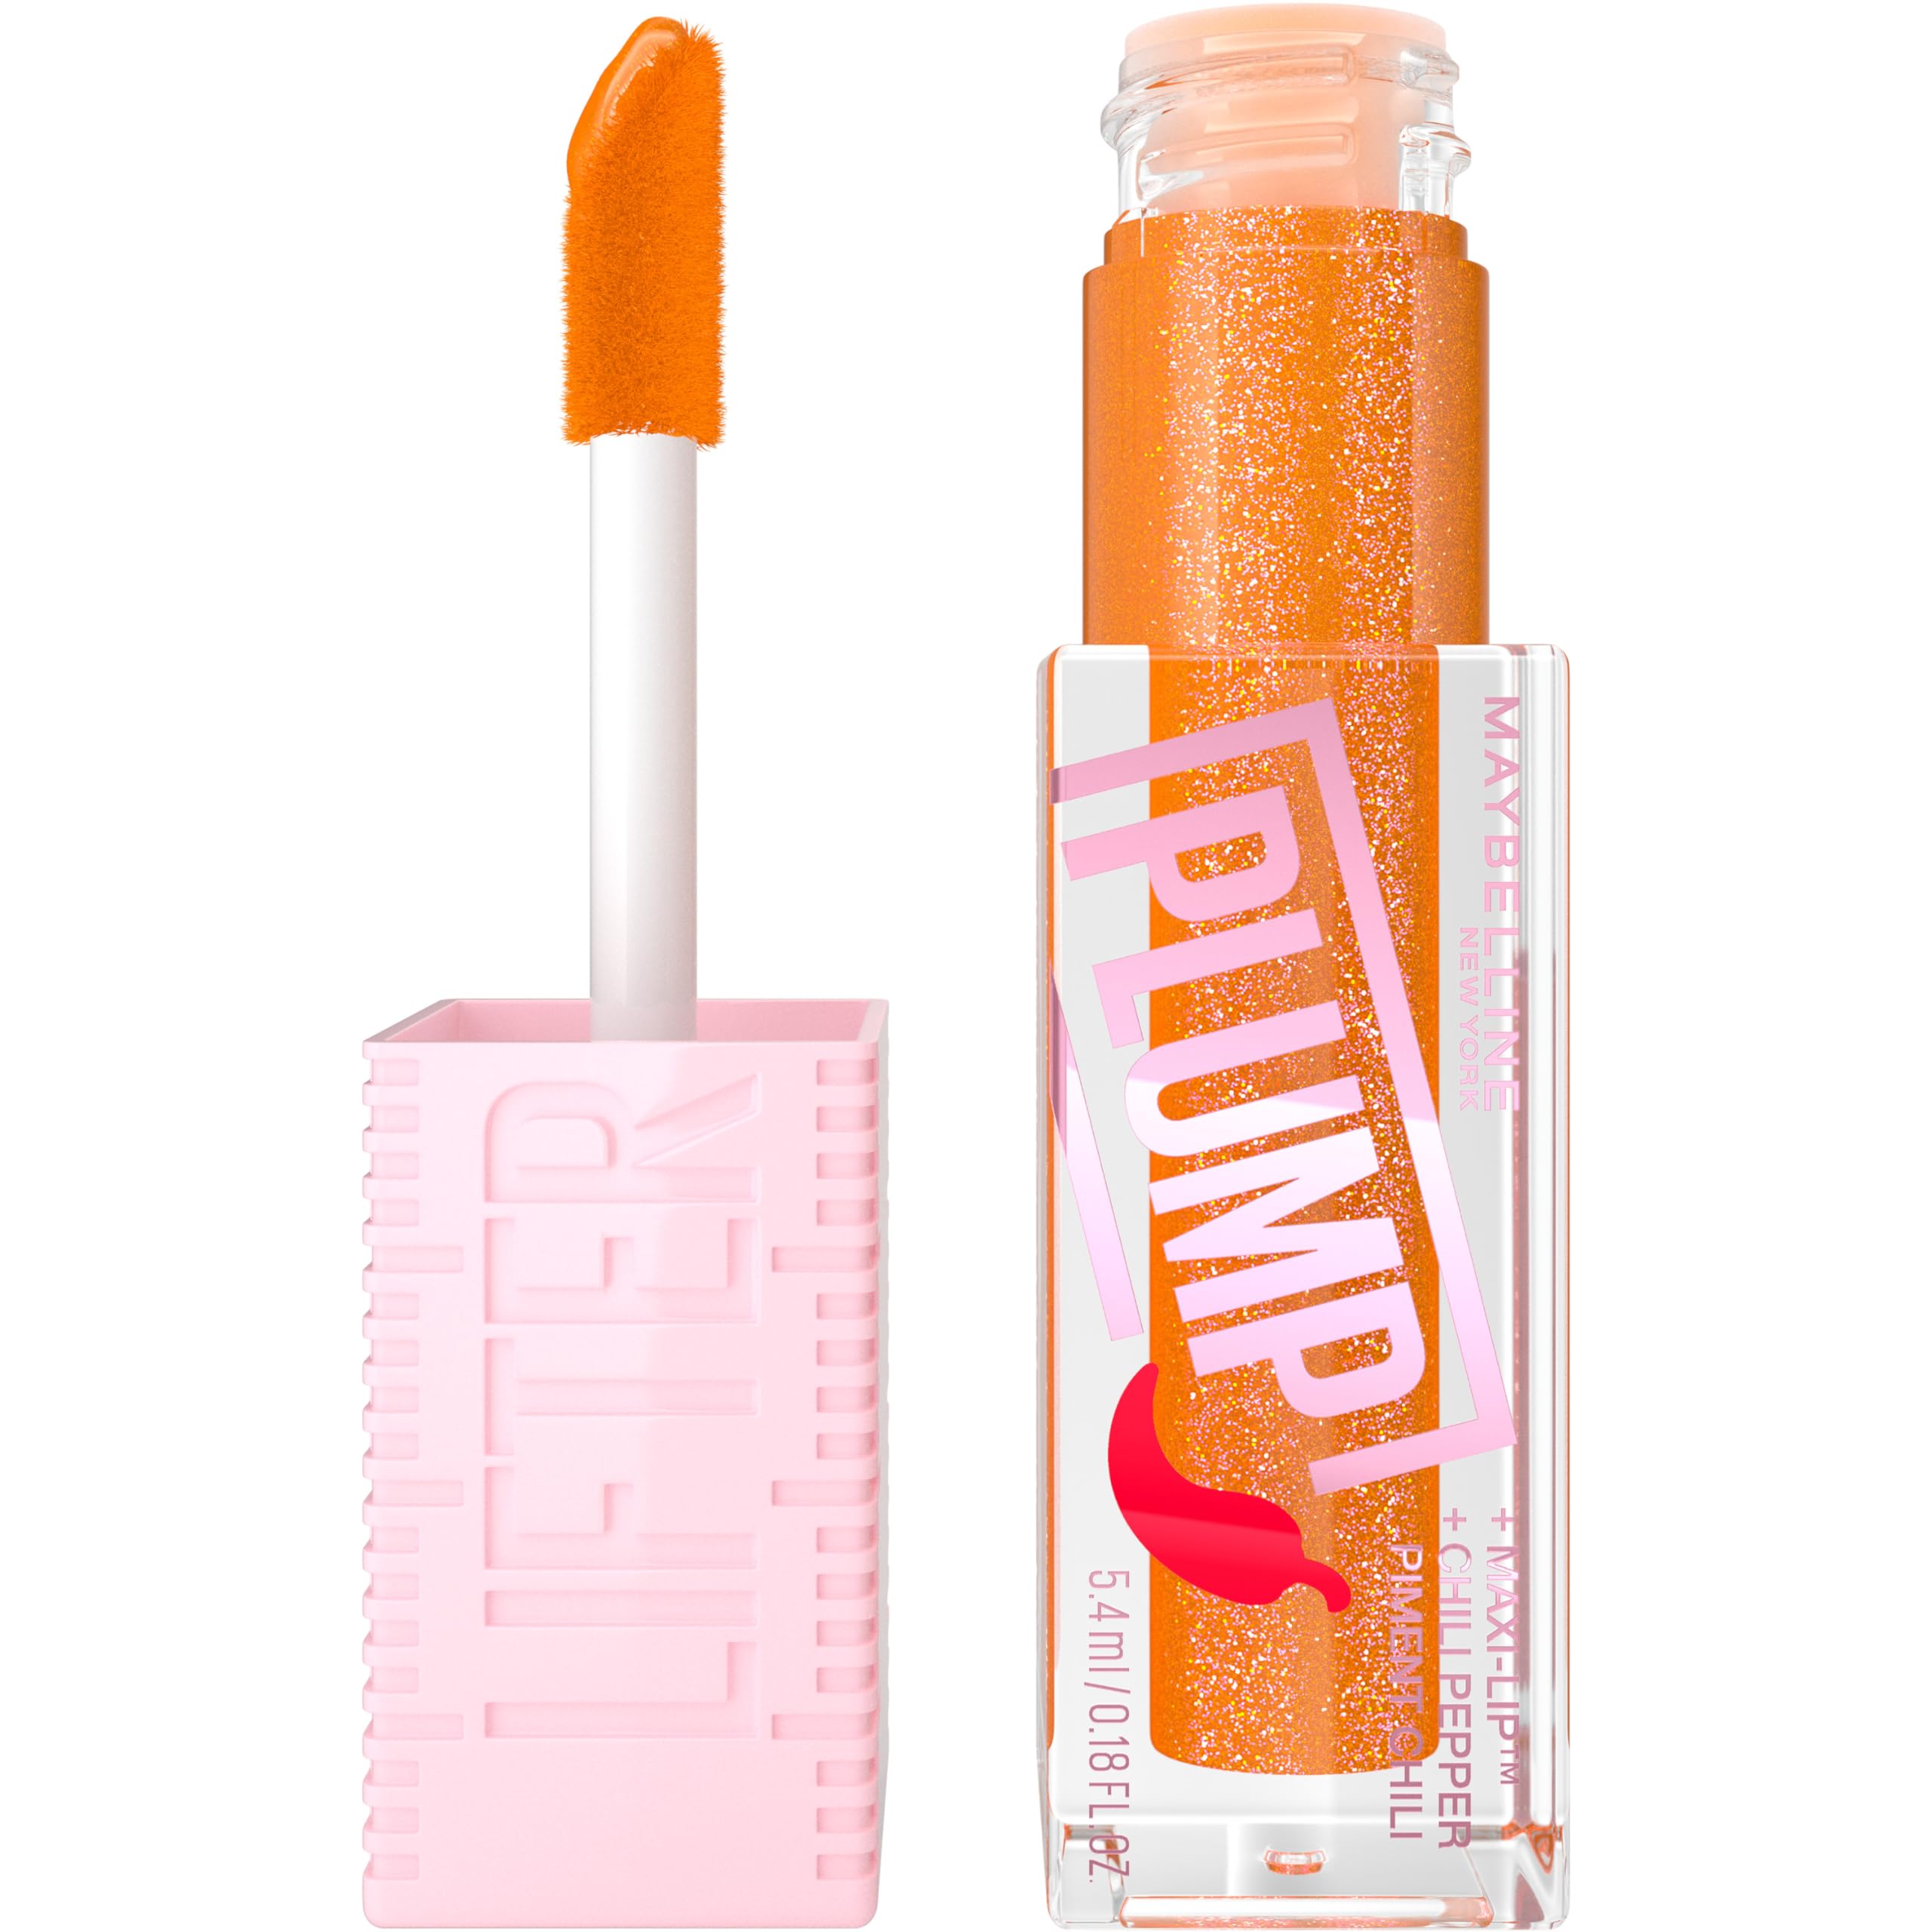 MAYBELLINE Lifter Gloss Lifter Plump, Plumping Lip Gloss with Chili Pepper and 5% Maxi-Lip, Hot Honey, Clear with Pink and Gold, 1 Count